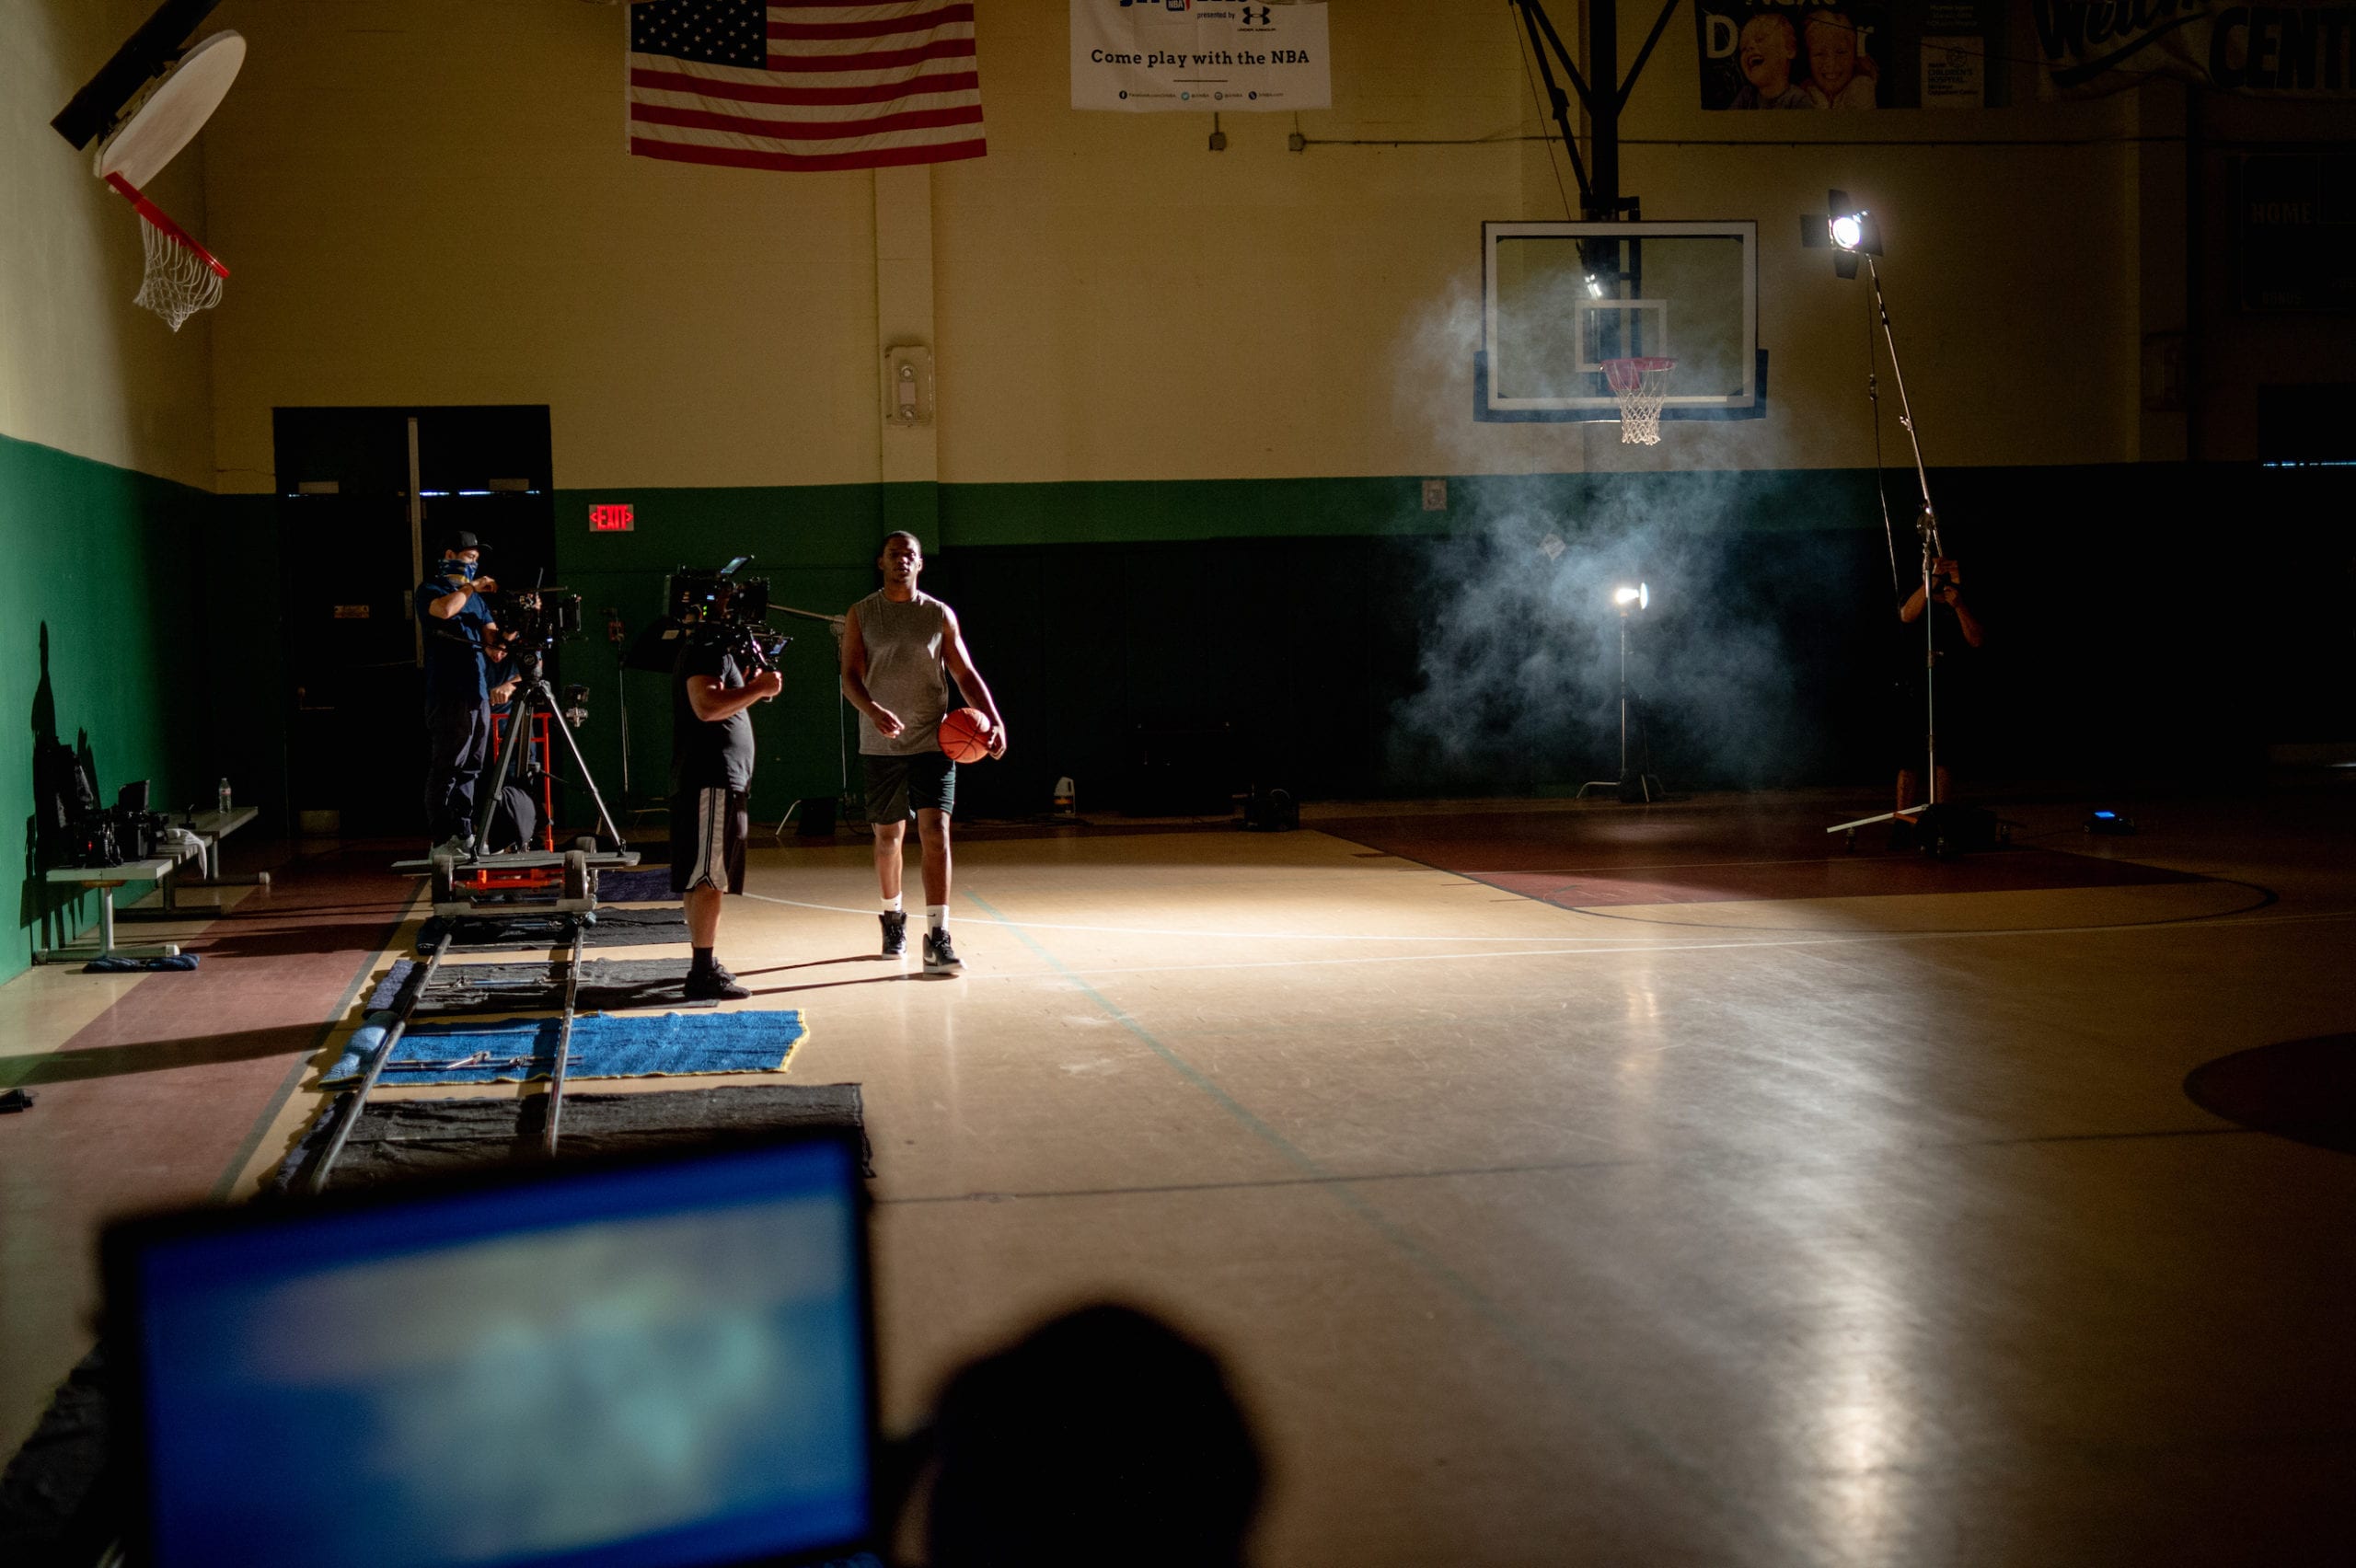 Nike scene being filmed on a basketball court in a gym with a basketball player holding a ball walking on the court surrounded by a film crew